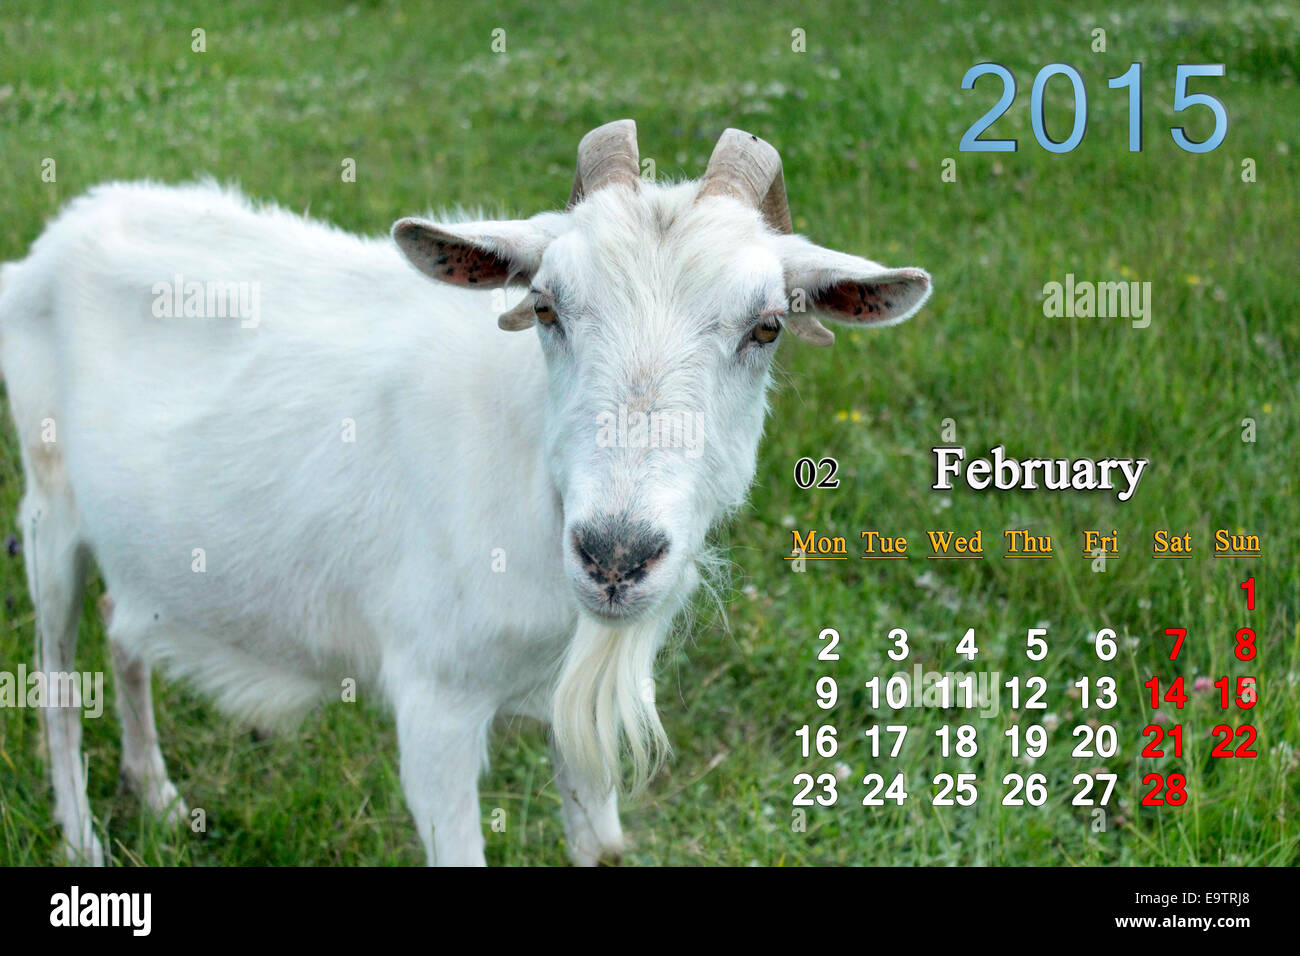 beautiful calendar for February of 2015 year with white goat Stock Photo